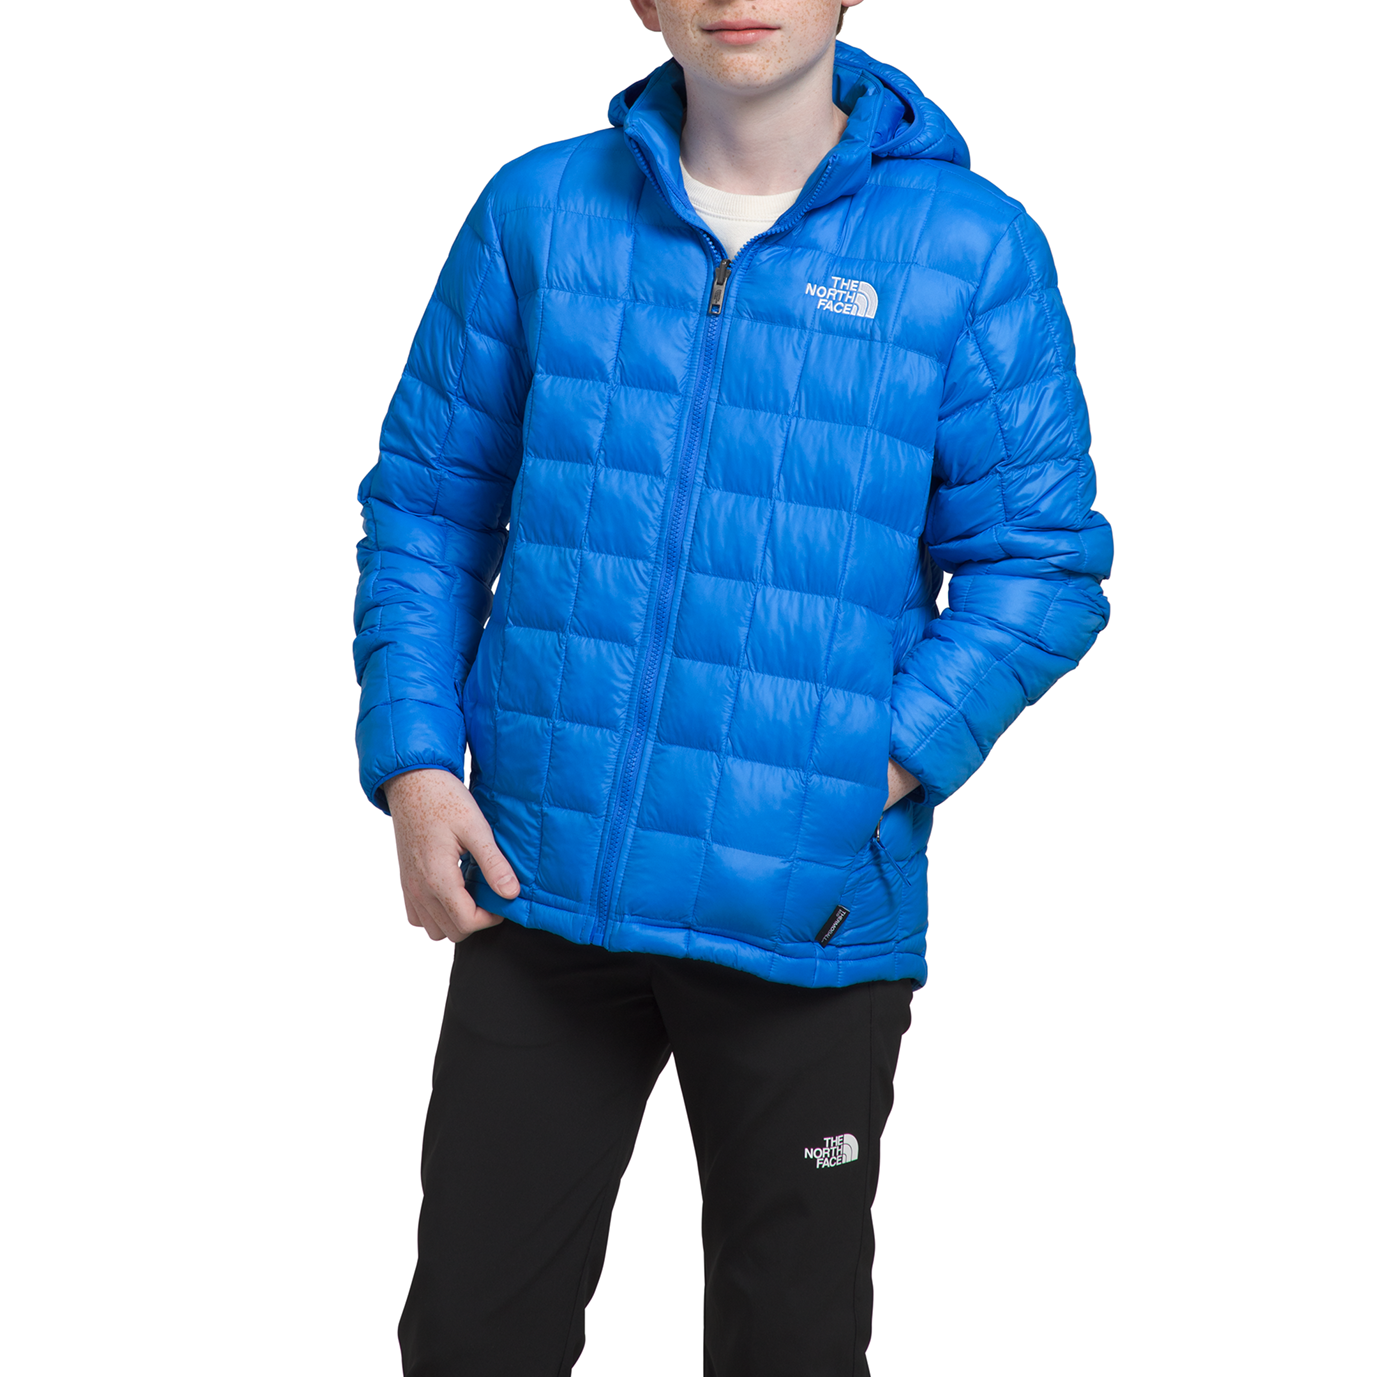 Куртка The North Face ThermoBall Hooded, синий куртка the north face reversible thermoball hooded черный